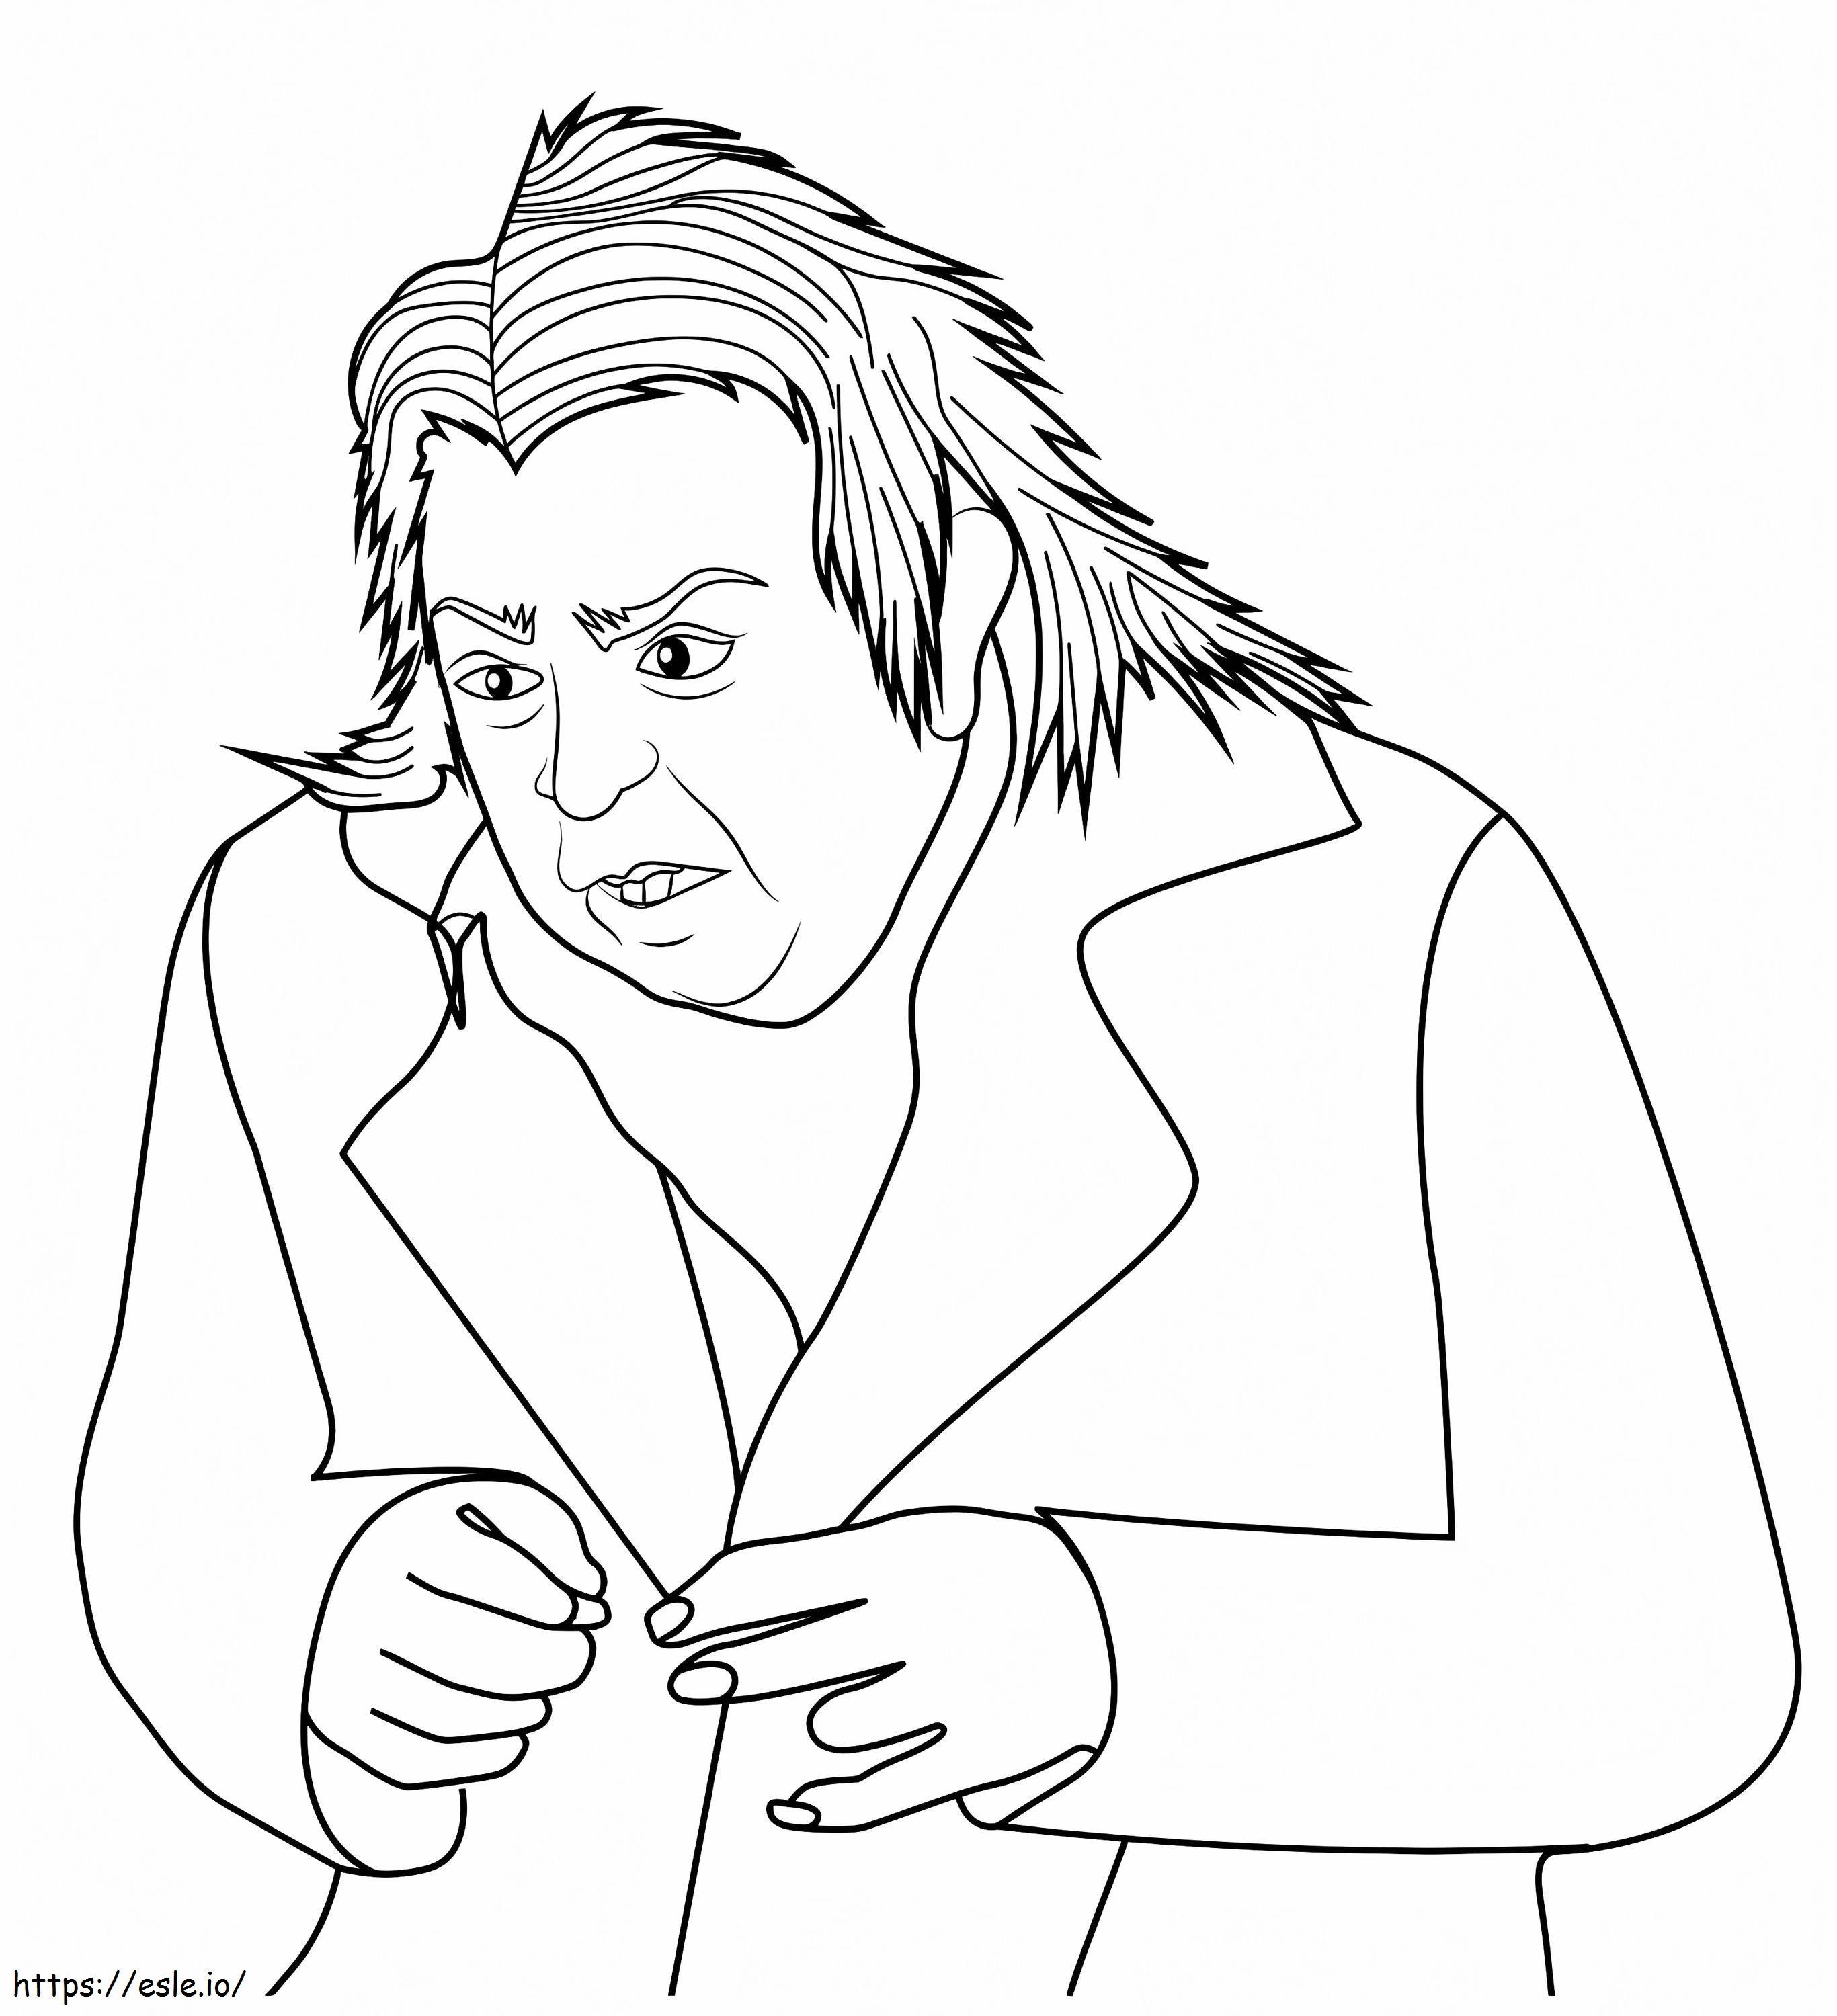 Peter Pettigrew From Harry Potter coloring page